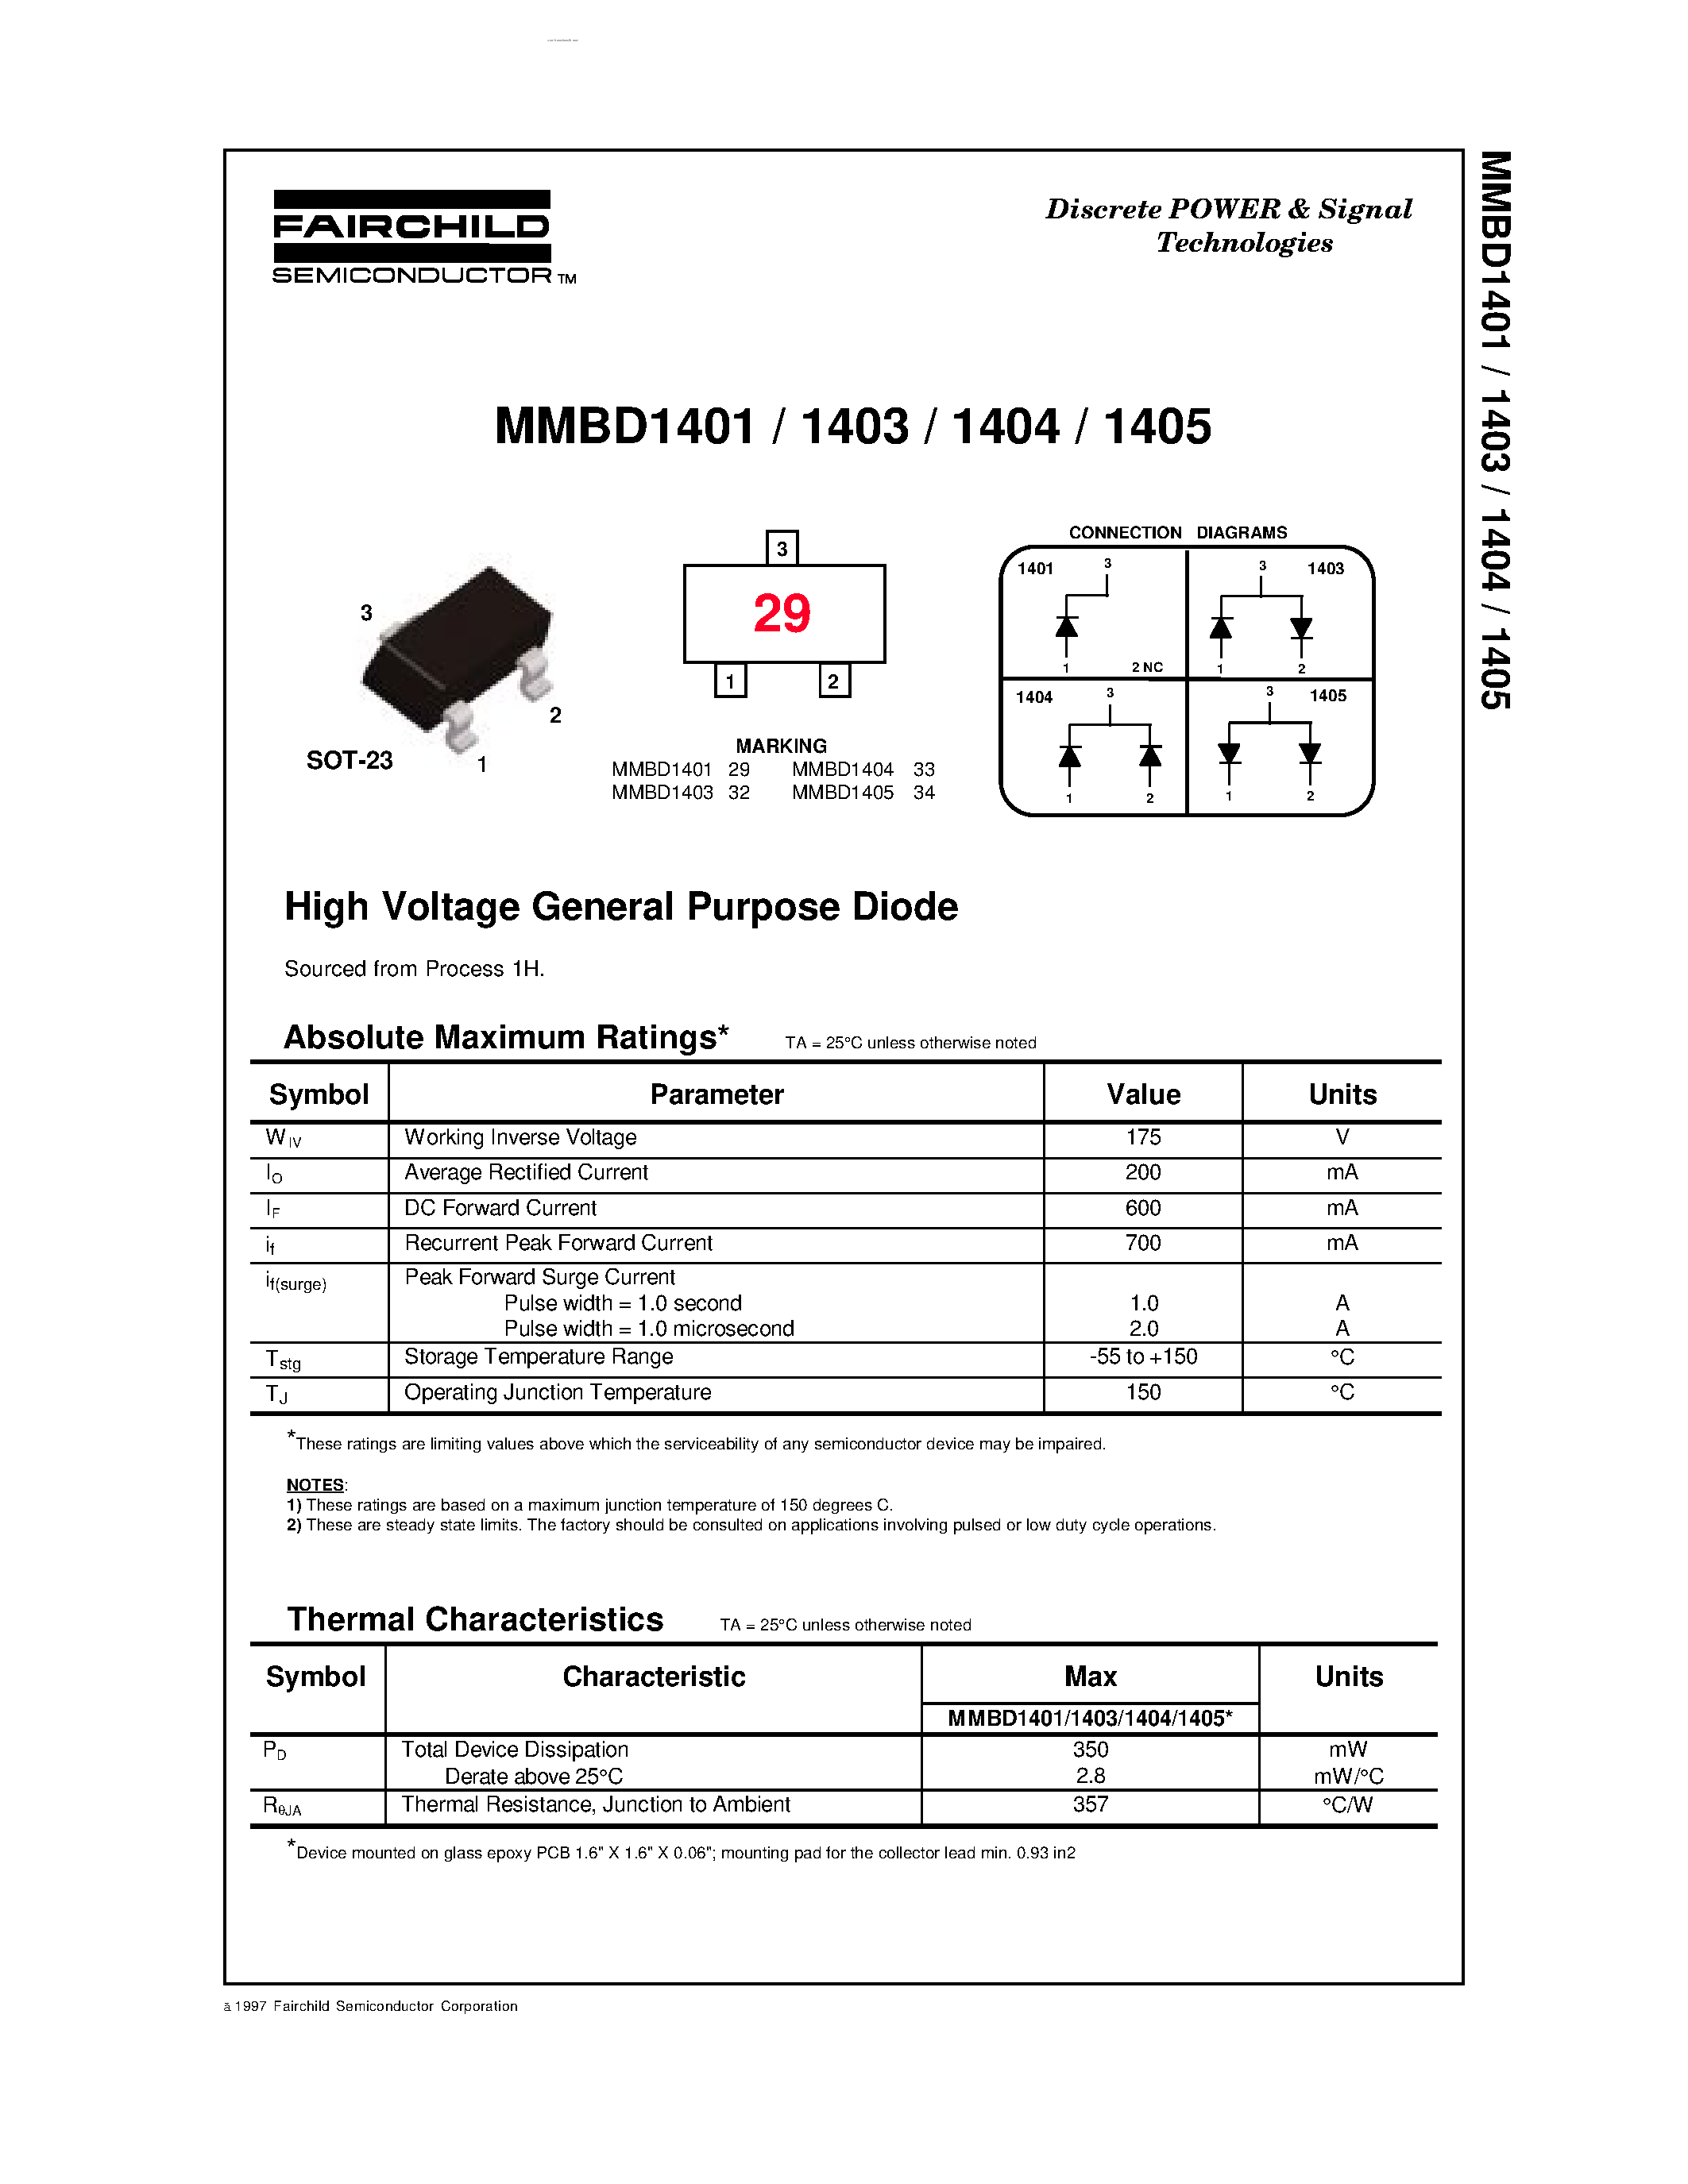 Даташит MMBD1405 - High Voltage General Purpose Diode страница 1